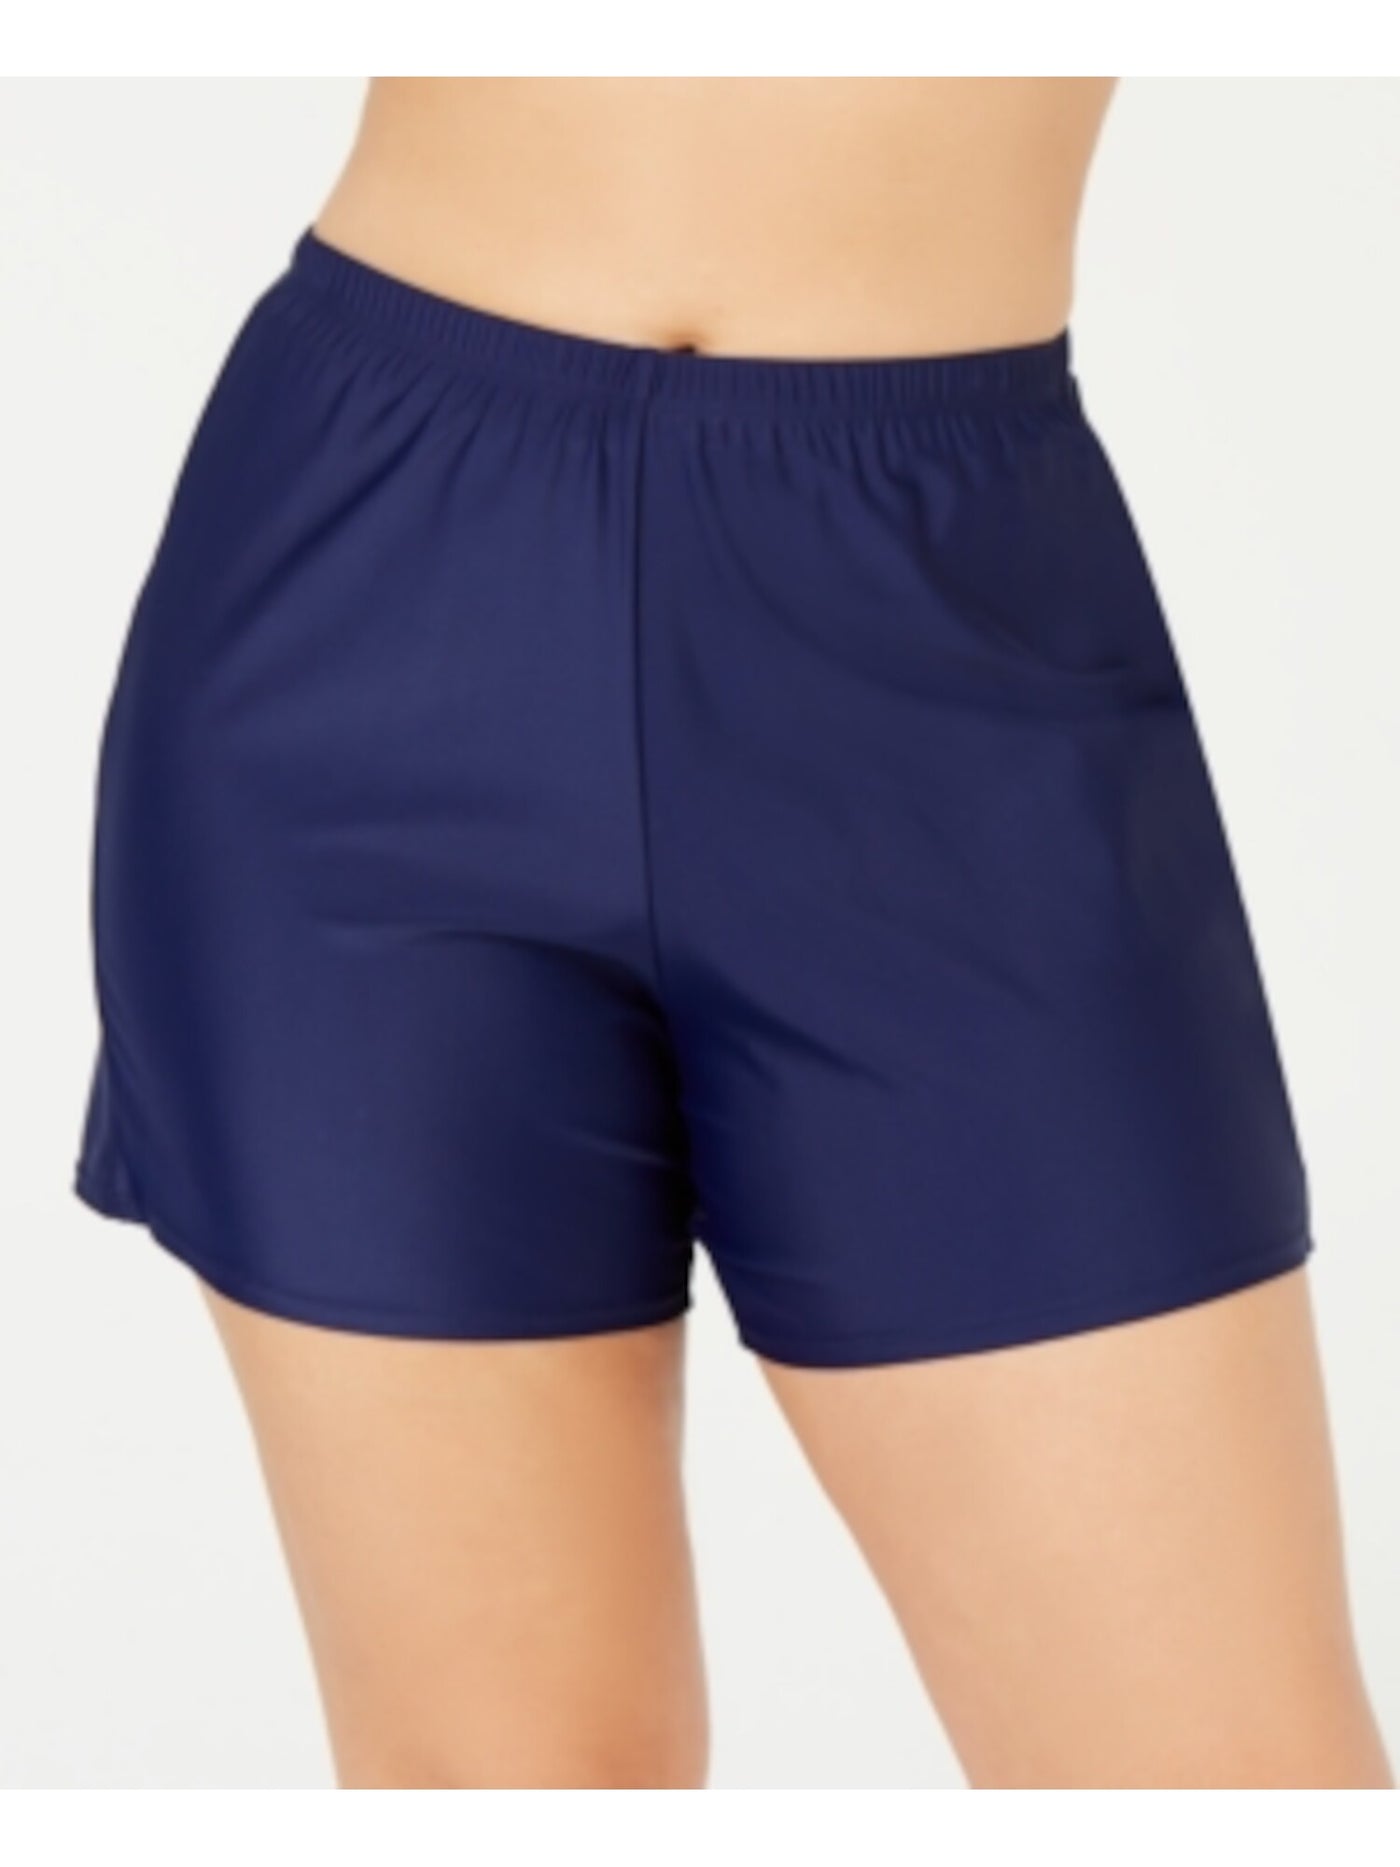 ISLAND ESCAPE Women's Navy Thigh Minimizing Lined Full Coverage Stretch Board Shorts 22W